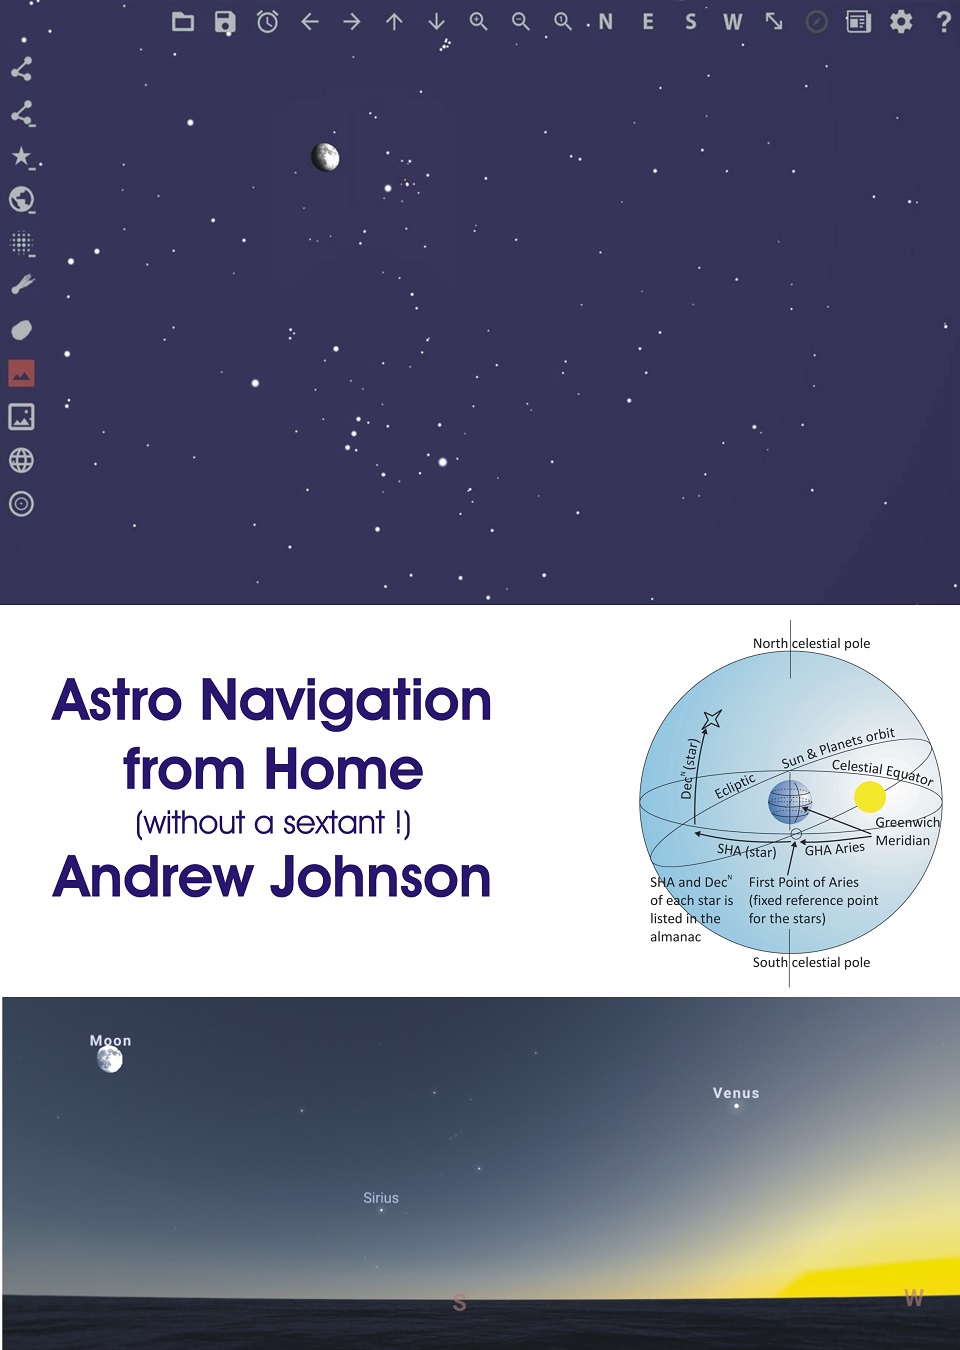 Astro Navigation from Home by Andy Johnson